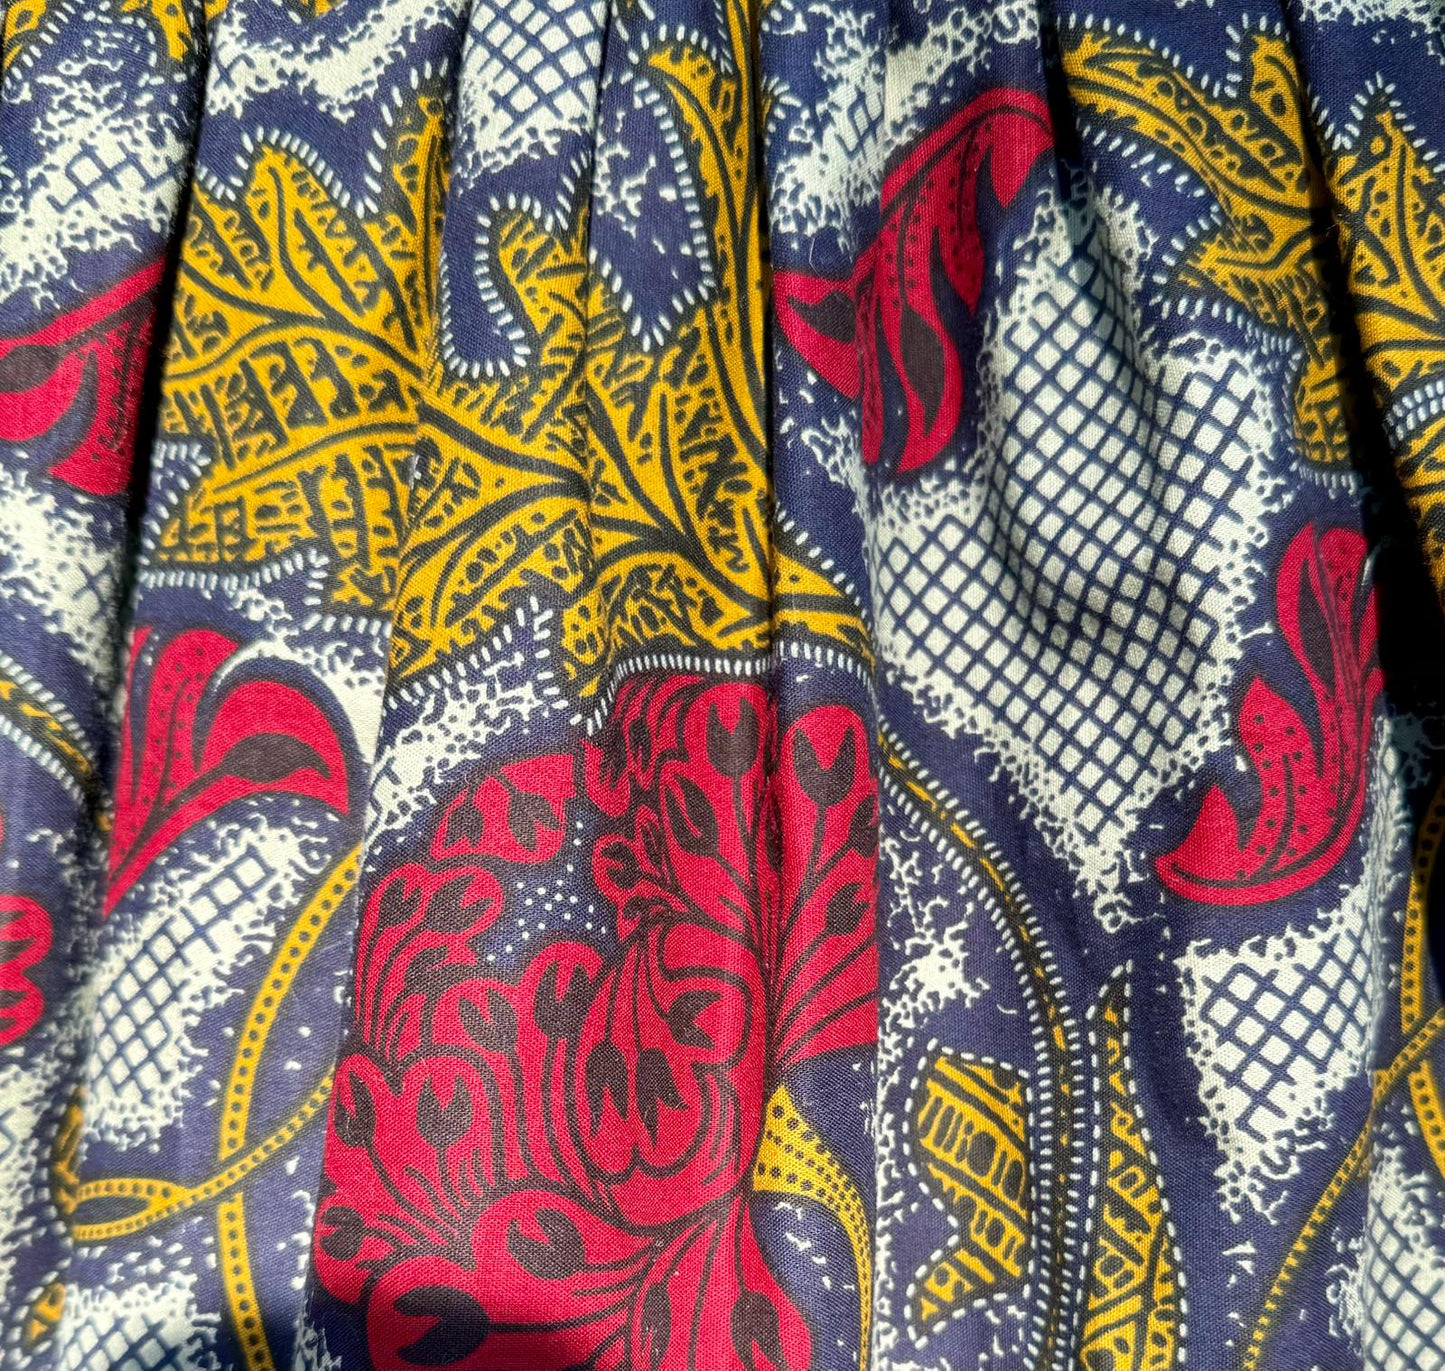 Vine leaves elastic Mini skirt Red and gold african print close up